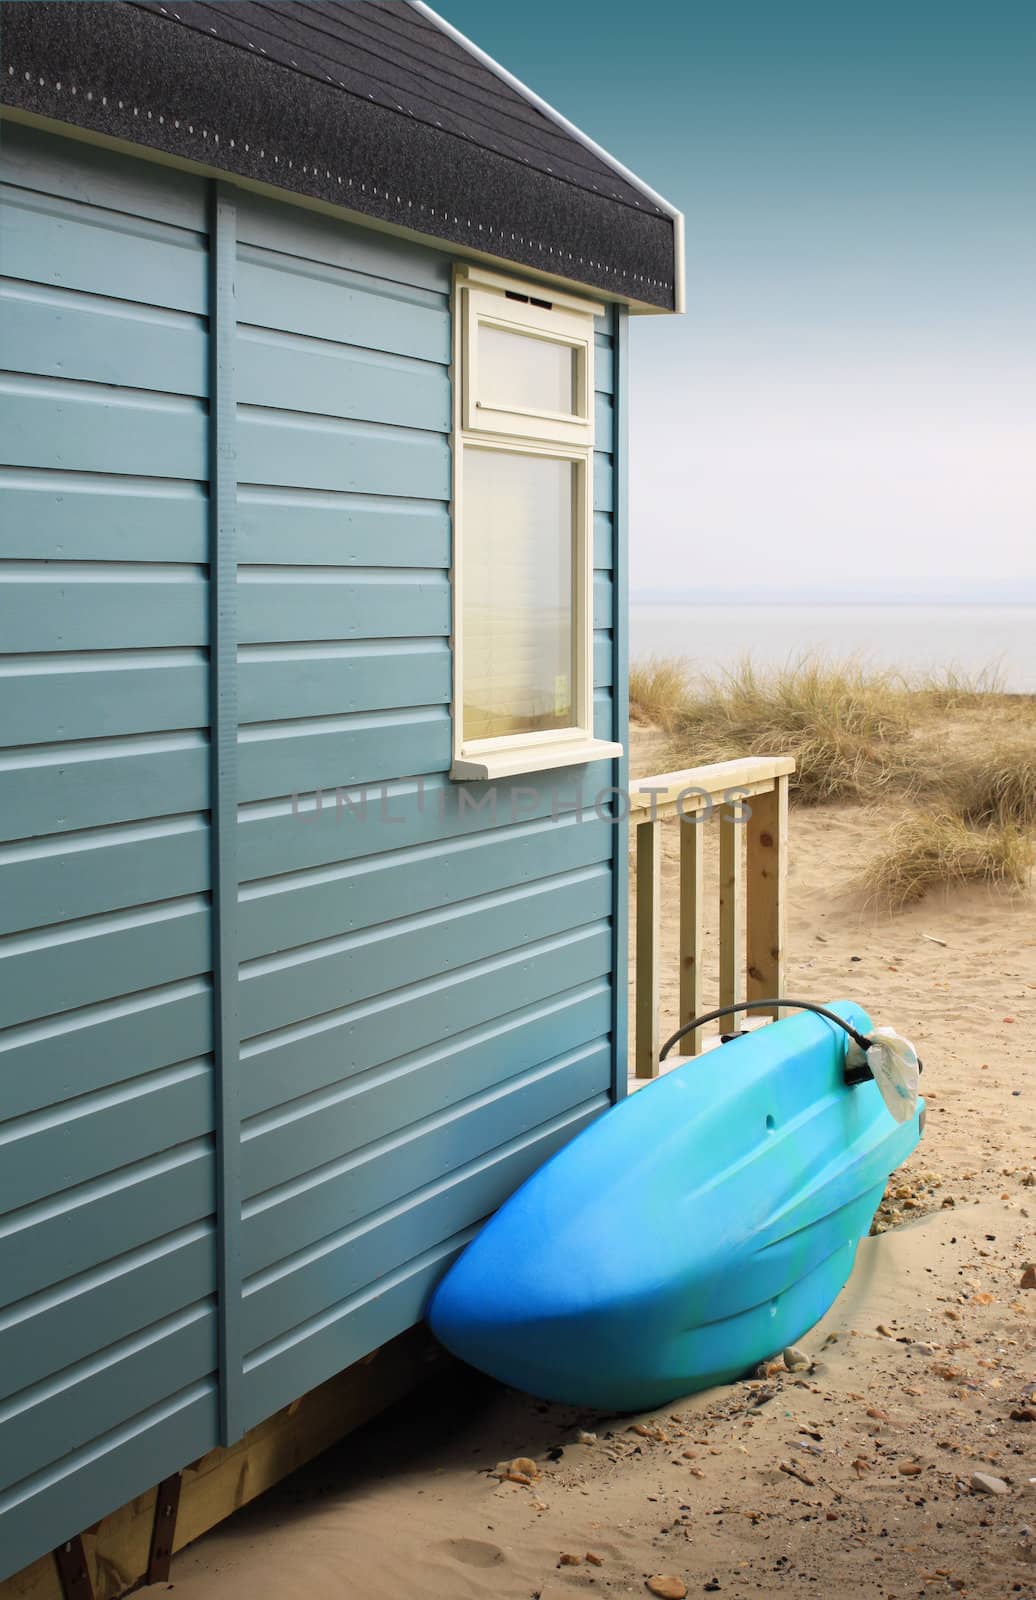 View of the side of a wooden beach hut with a blue surf board, looking towards the beach. Located in Christchurch, Dorset Hampshire UK.